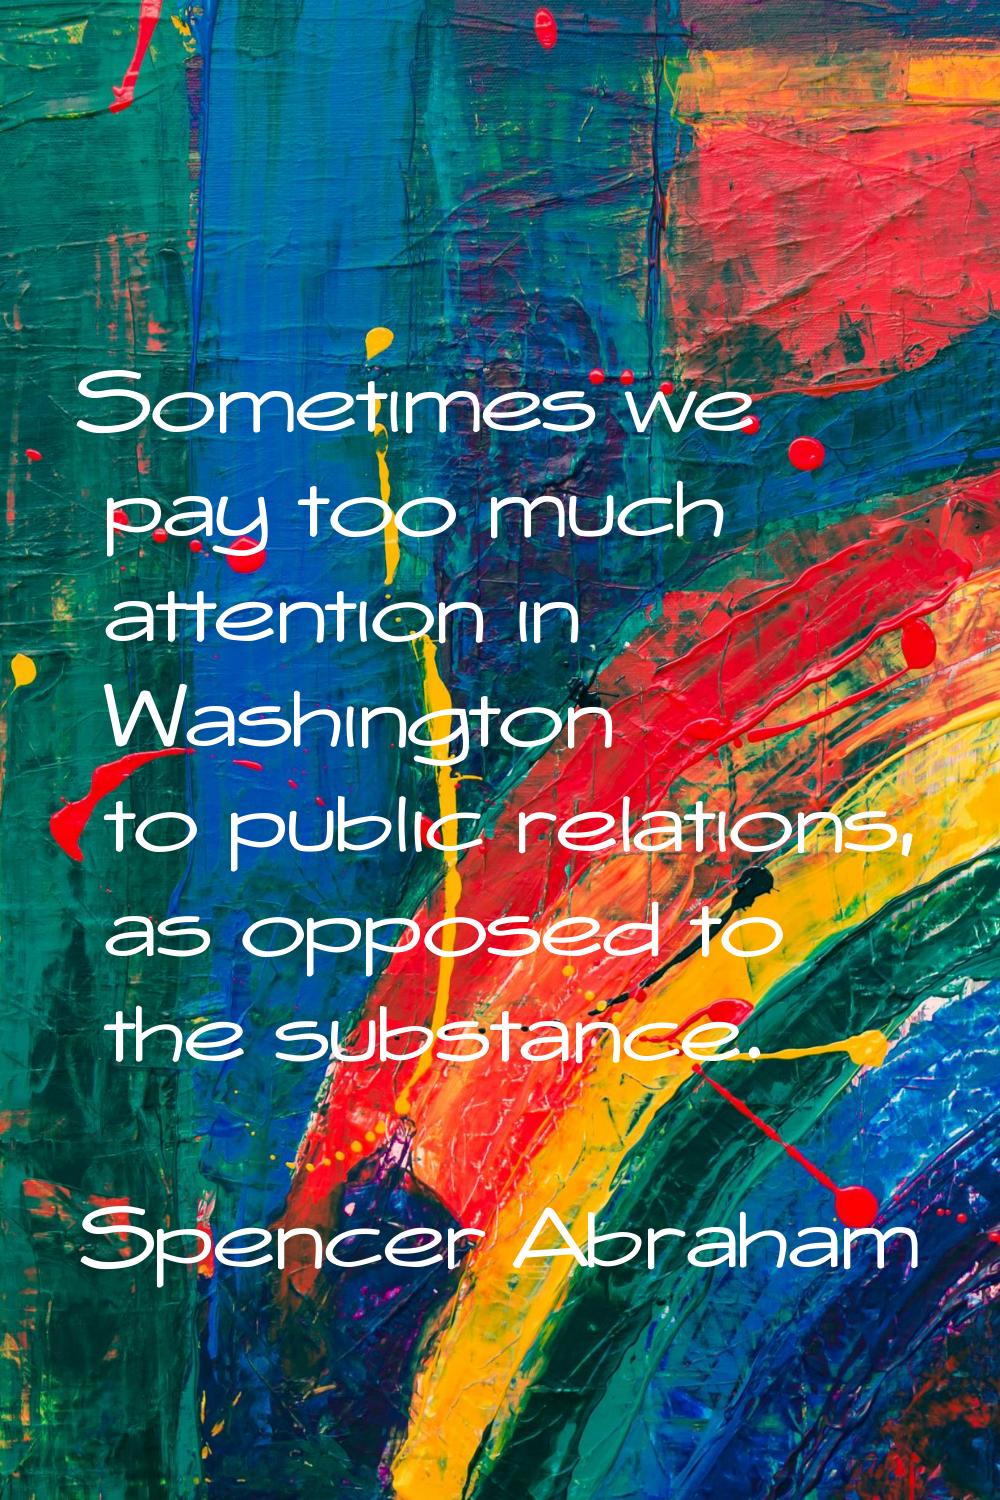 Sometimes we pay too much attention in Washington to public relations, as opposed to the substance.